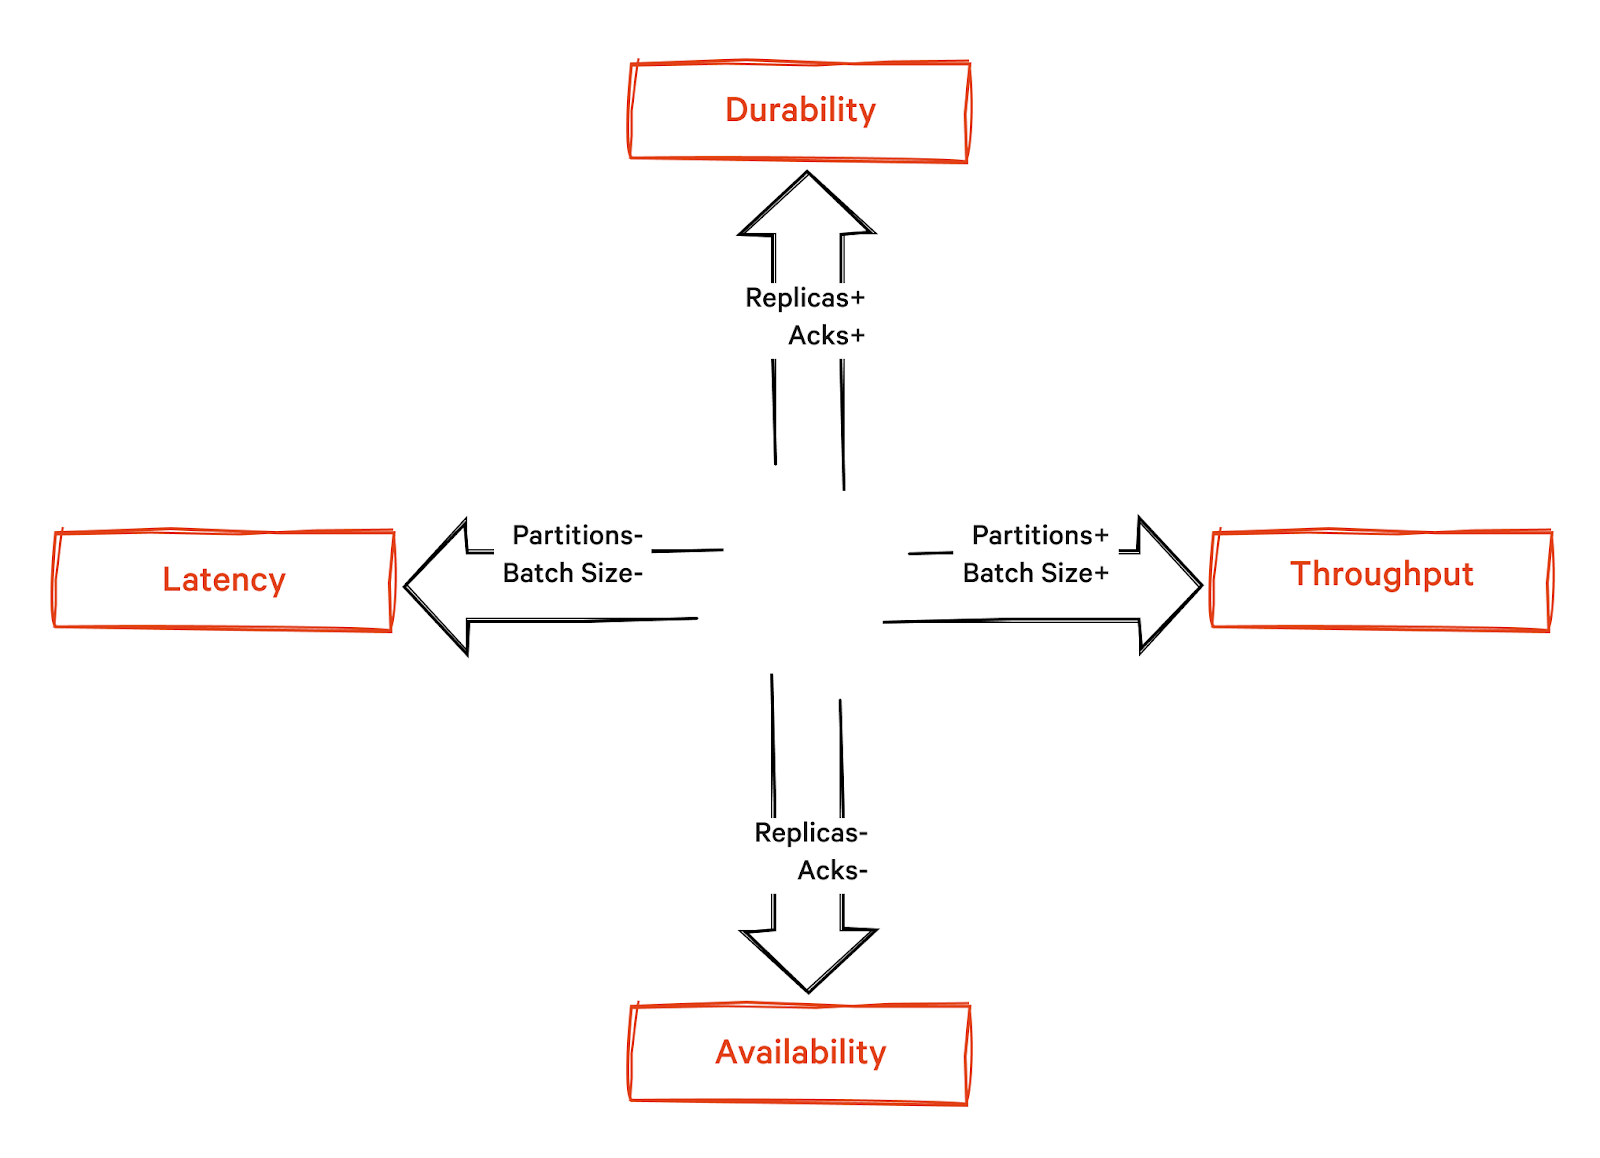 Kafka performance involves two orthogonal axes: availability versus durability and latency versus throughput.